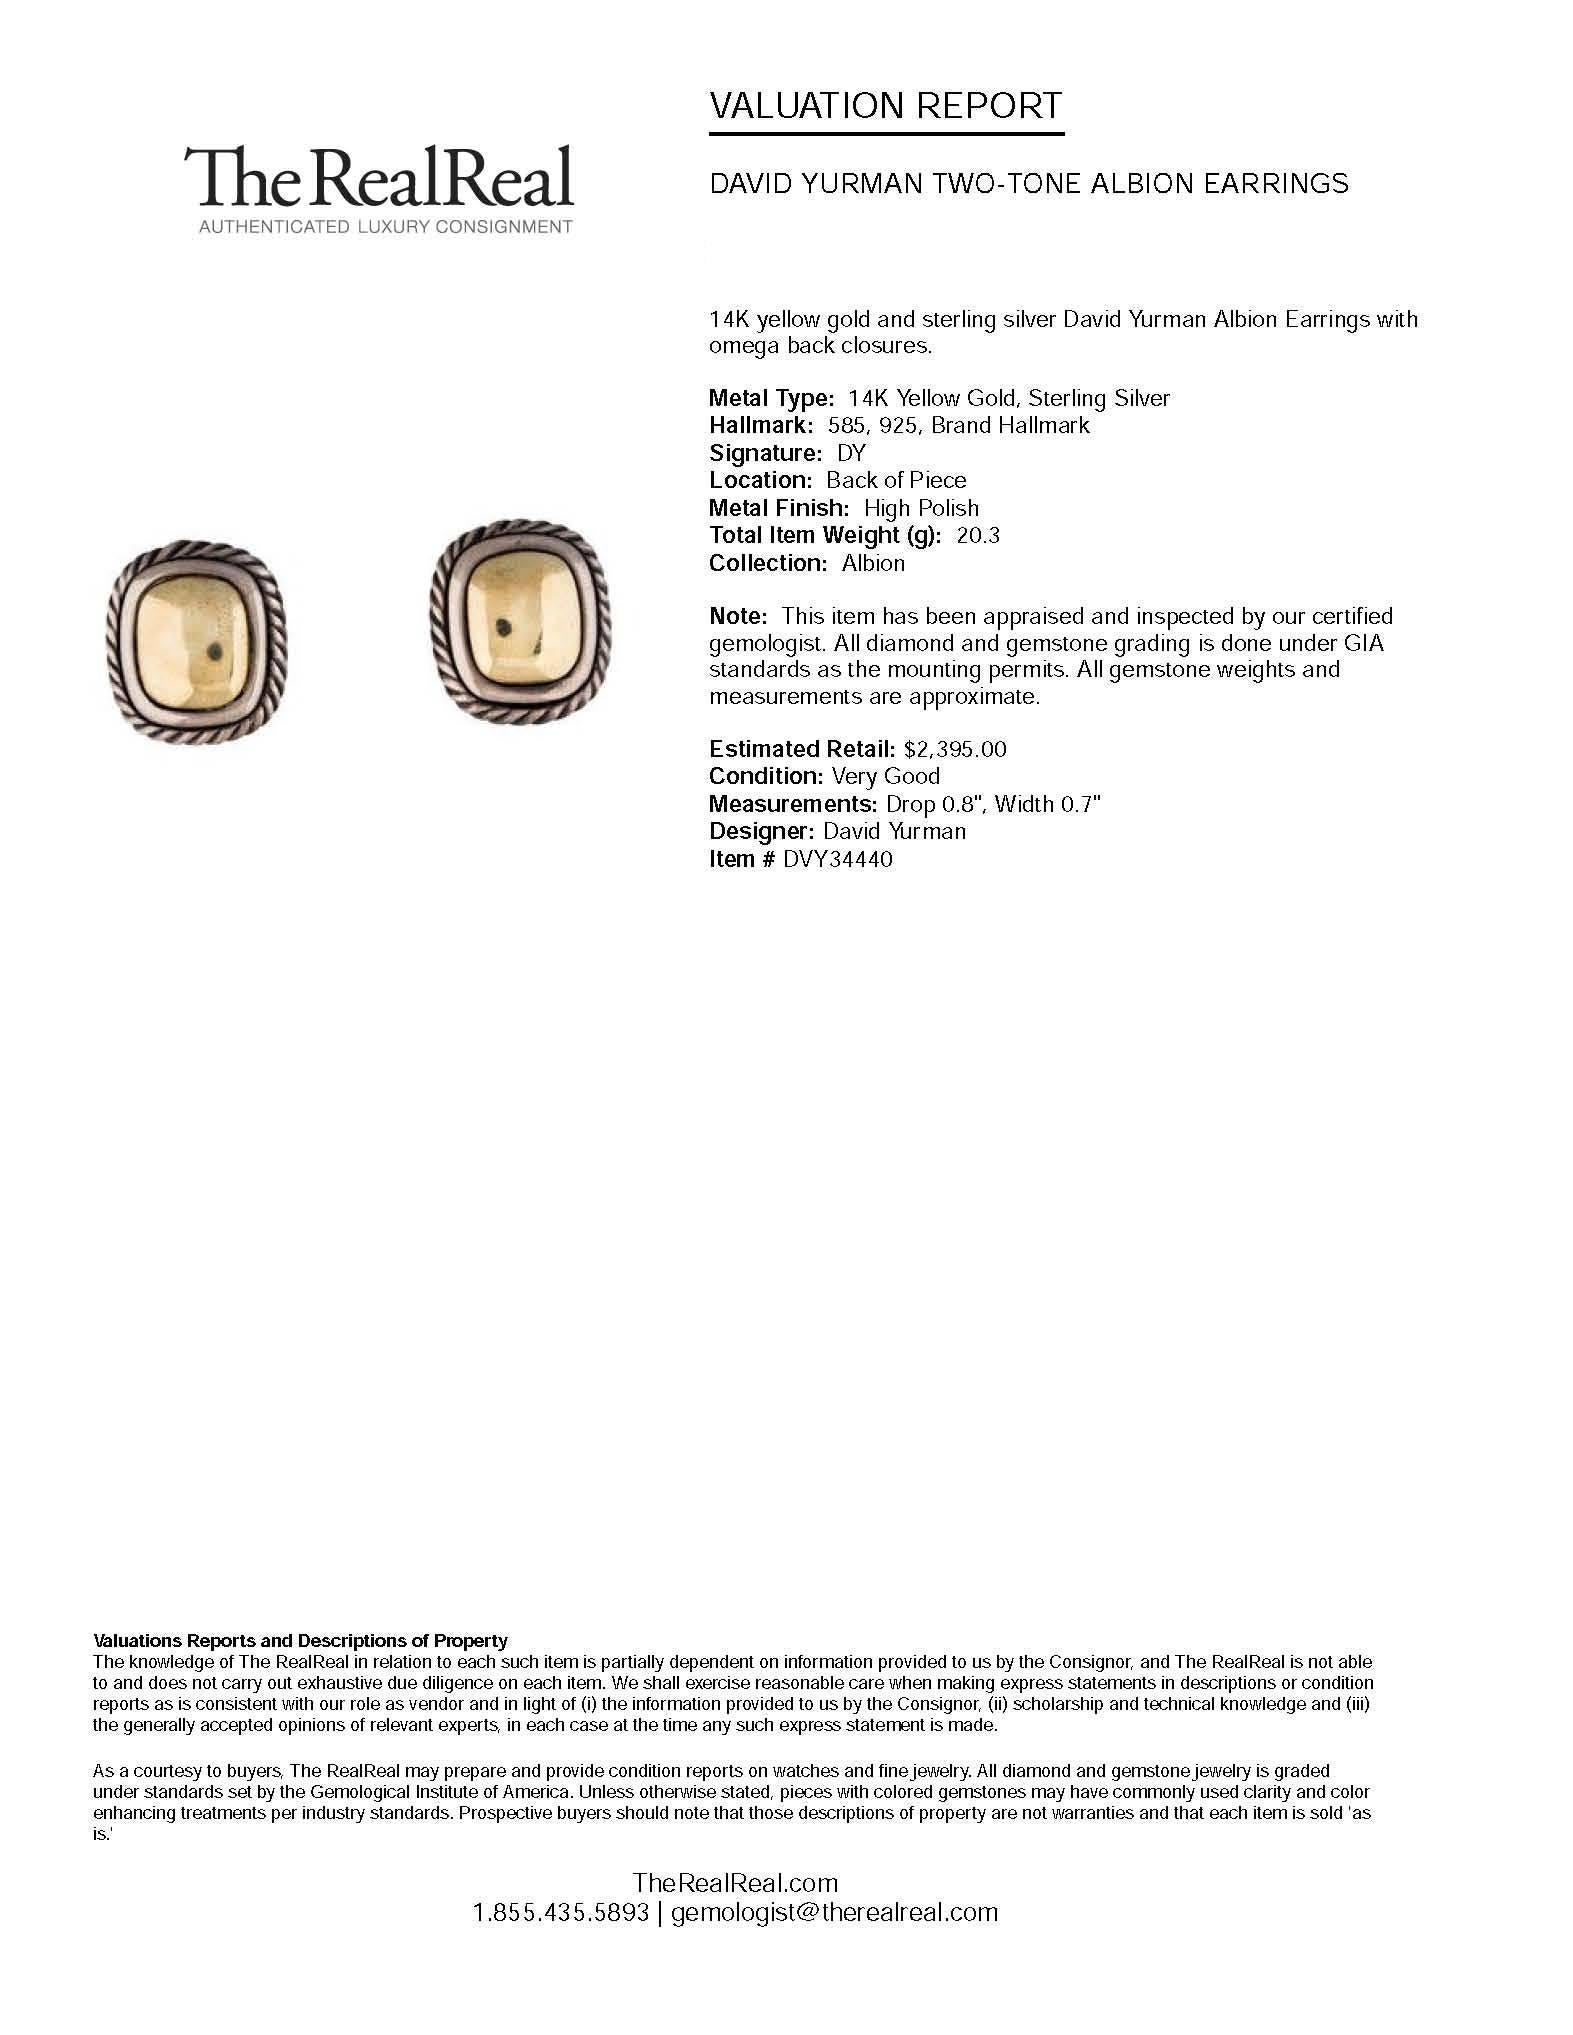 David Yurman Silver and Gold Dome Albion Cable Earrings 2